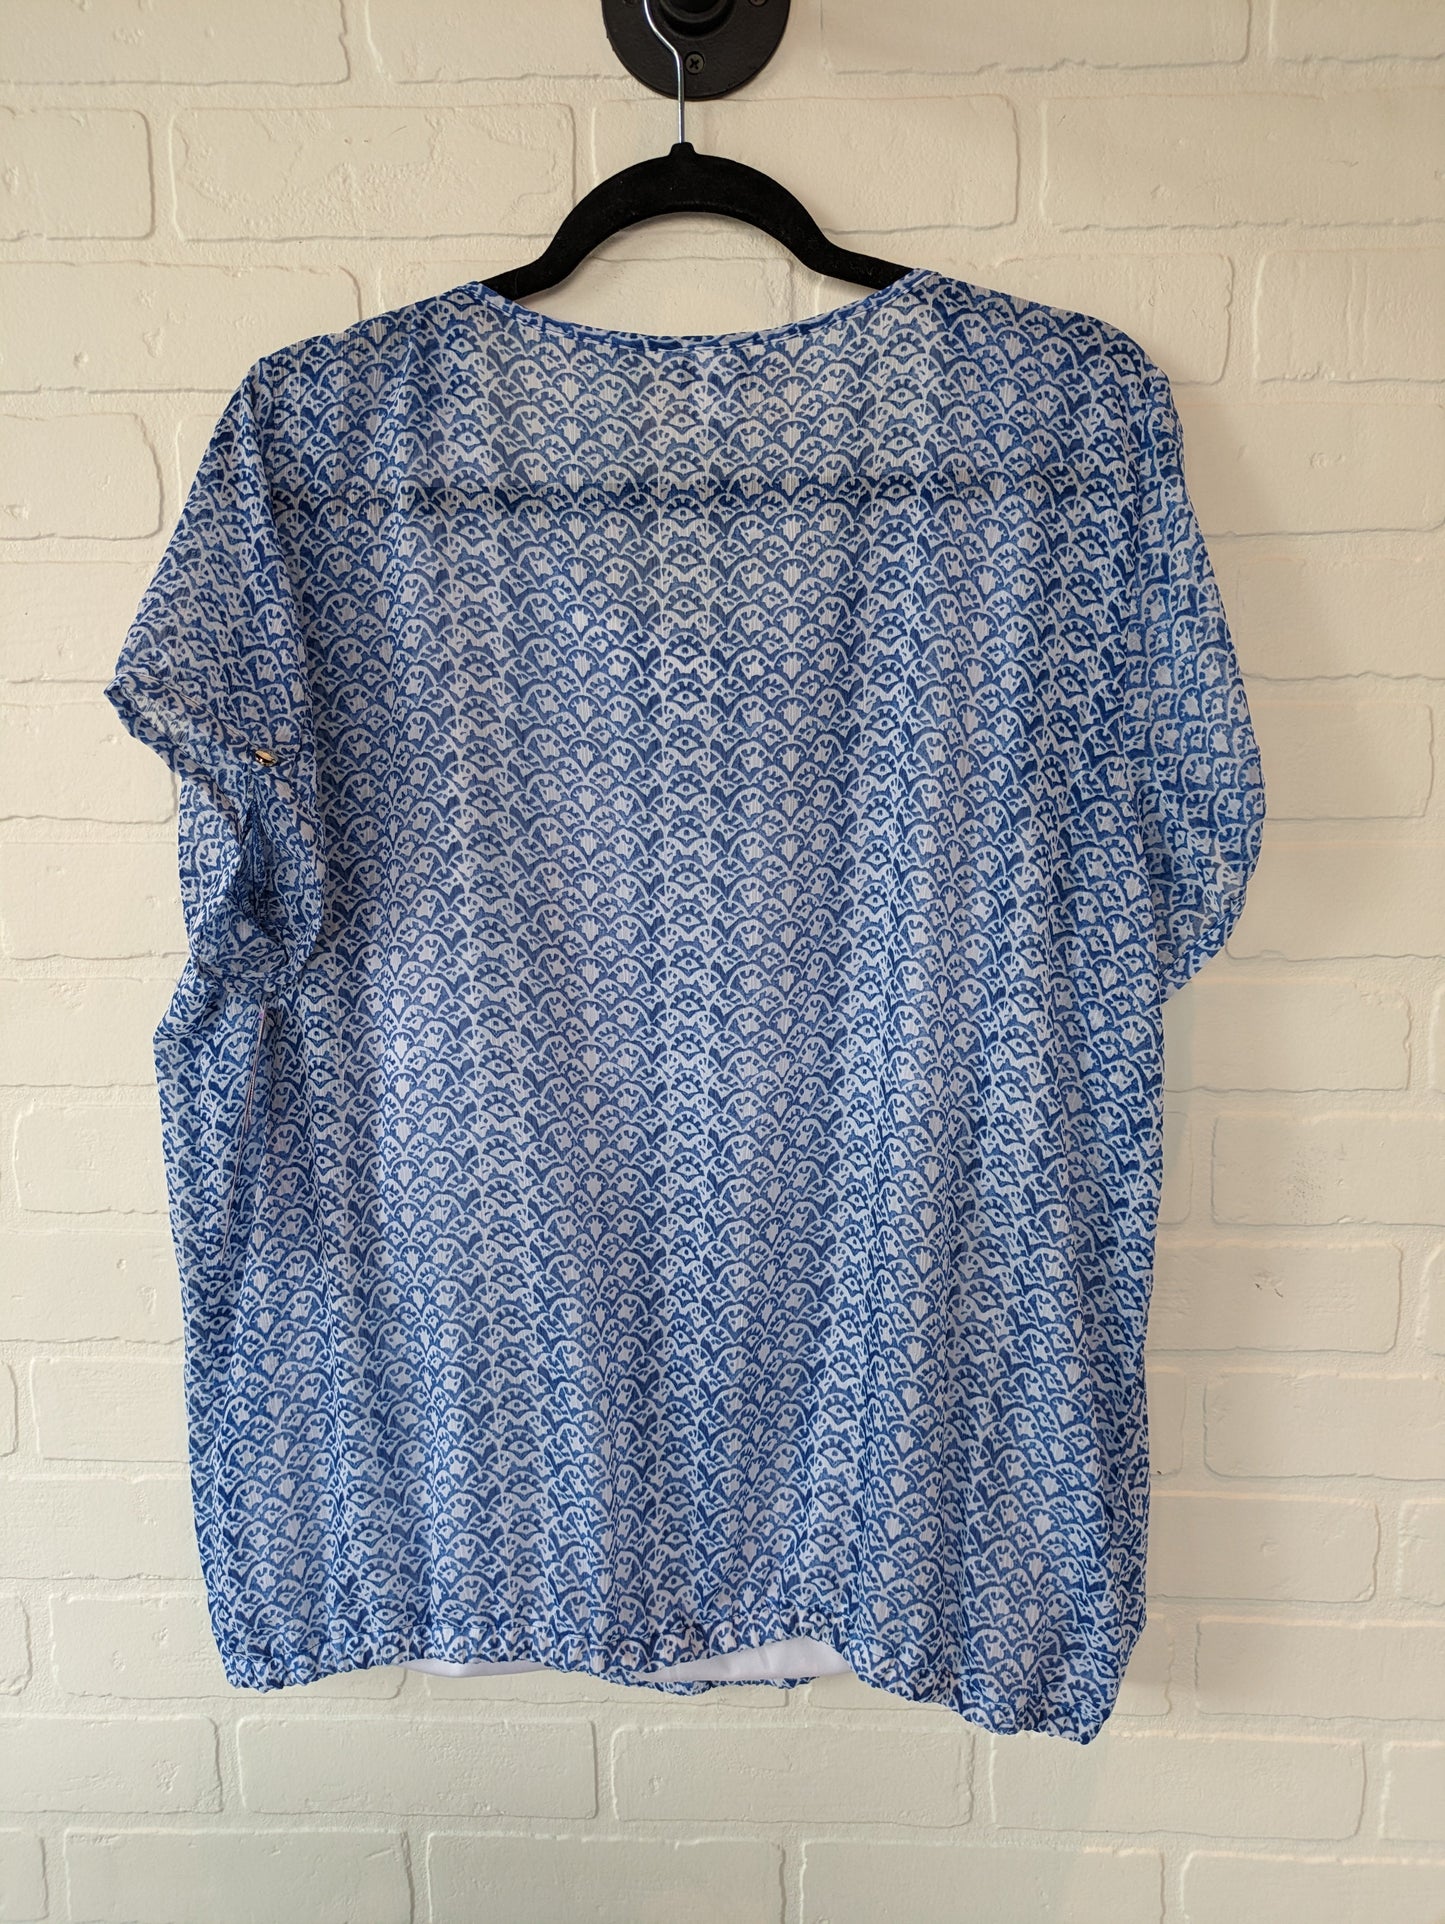 Blue Top Short Sleeve Christopher And Banks, Size Xl